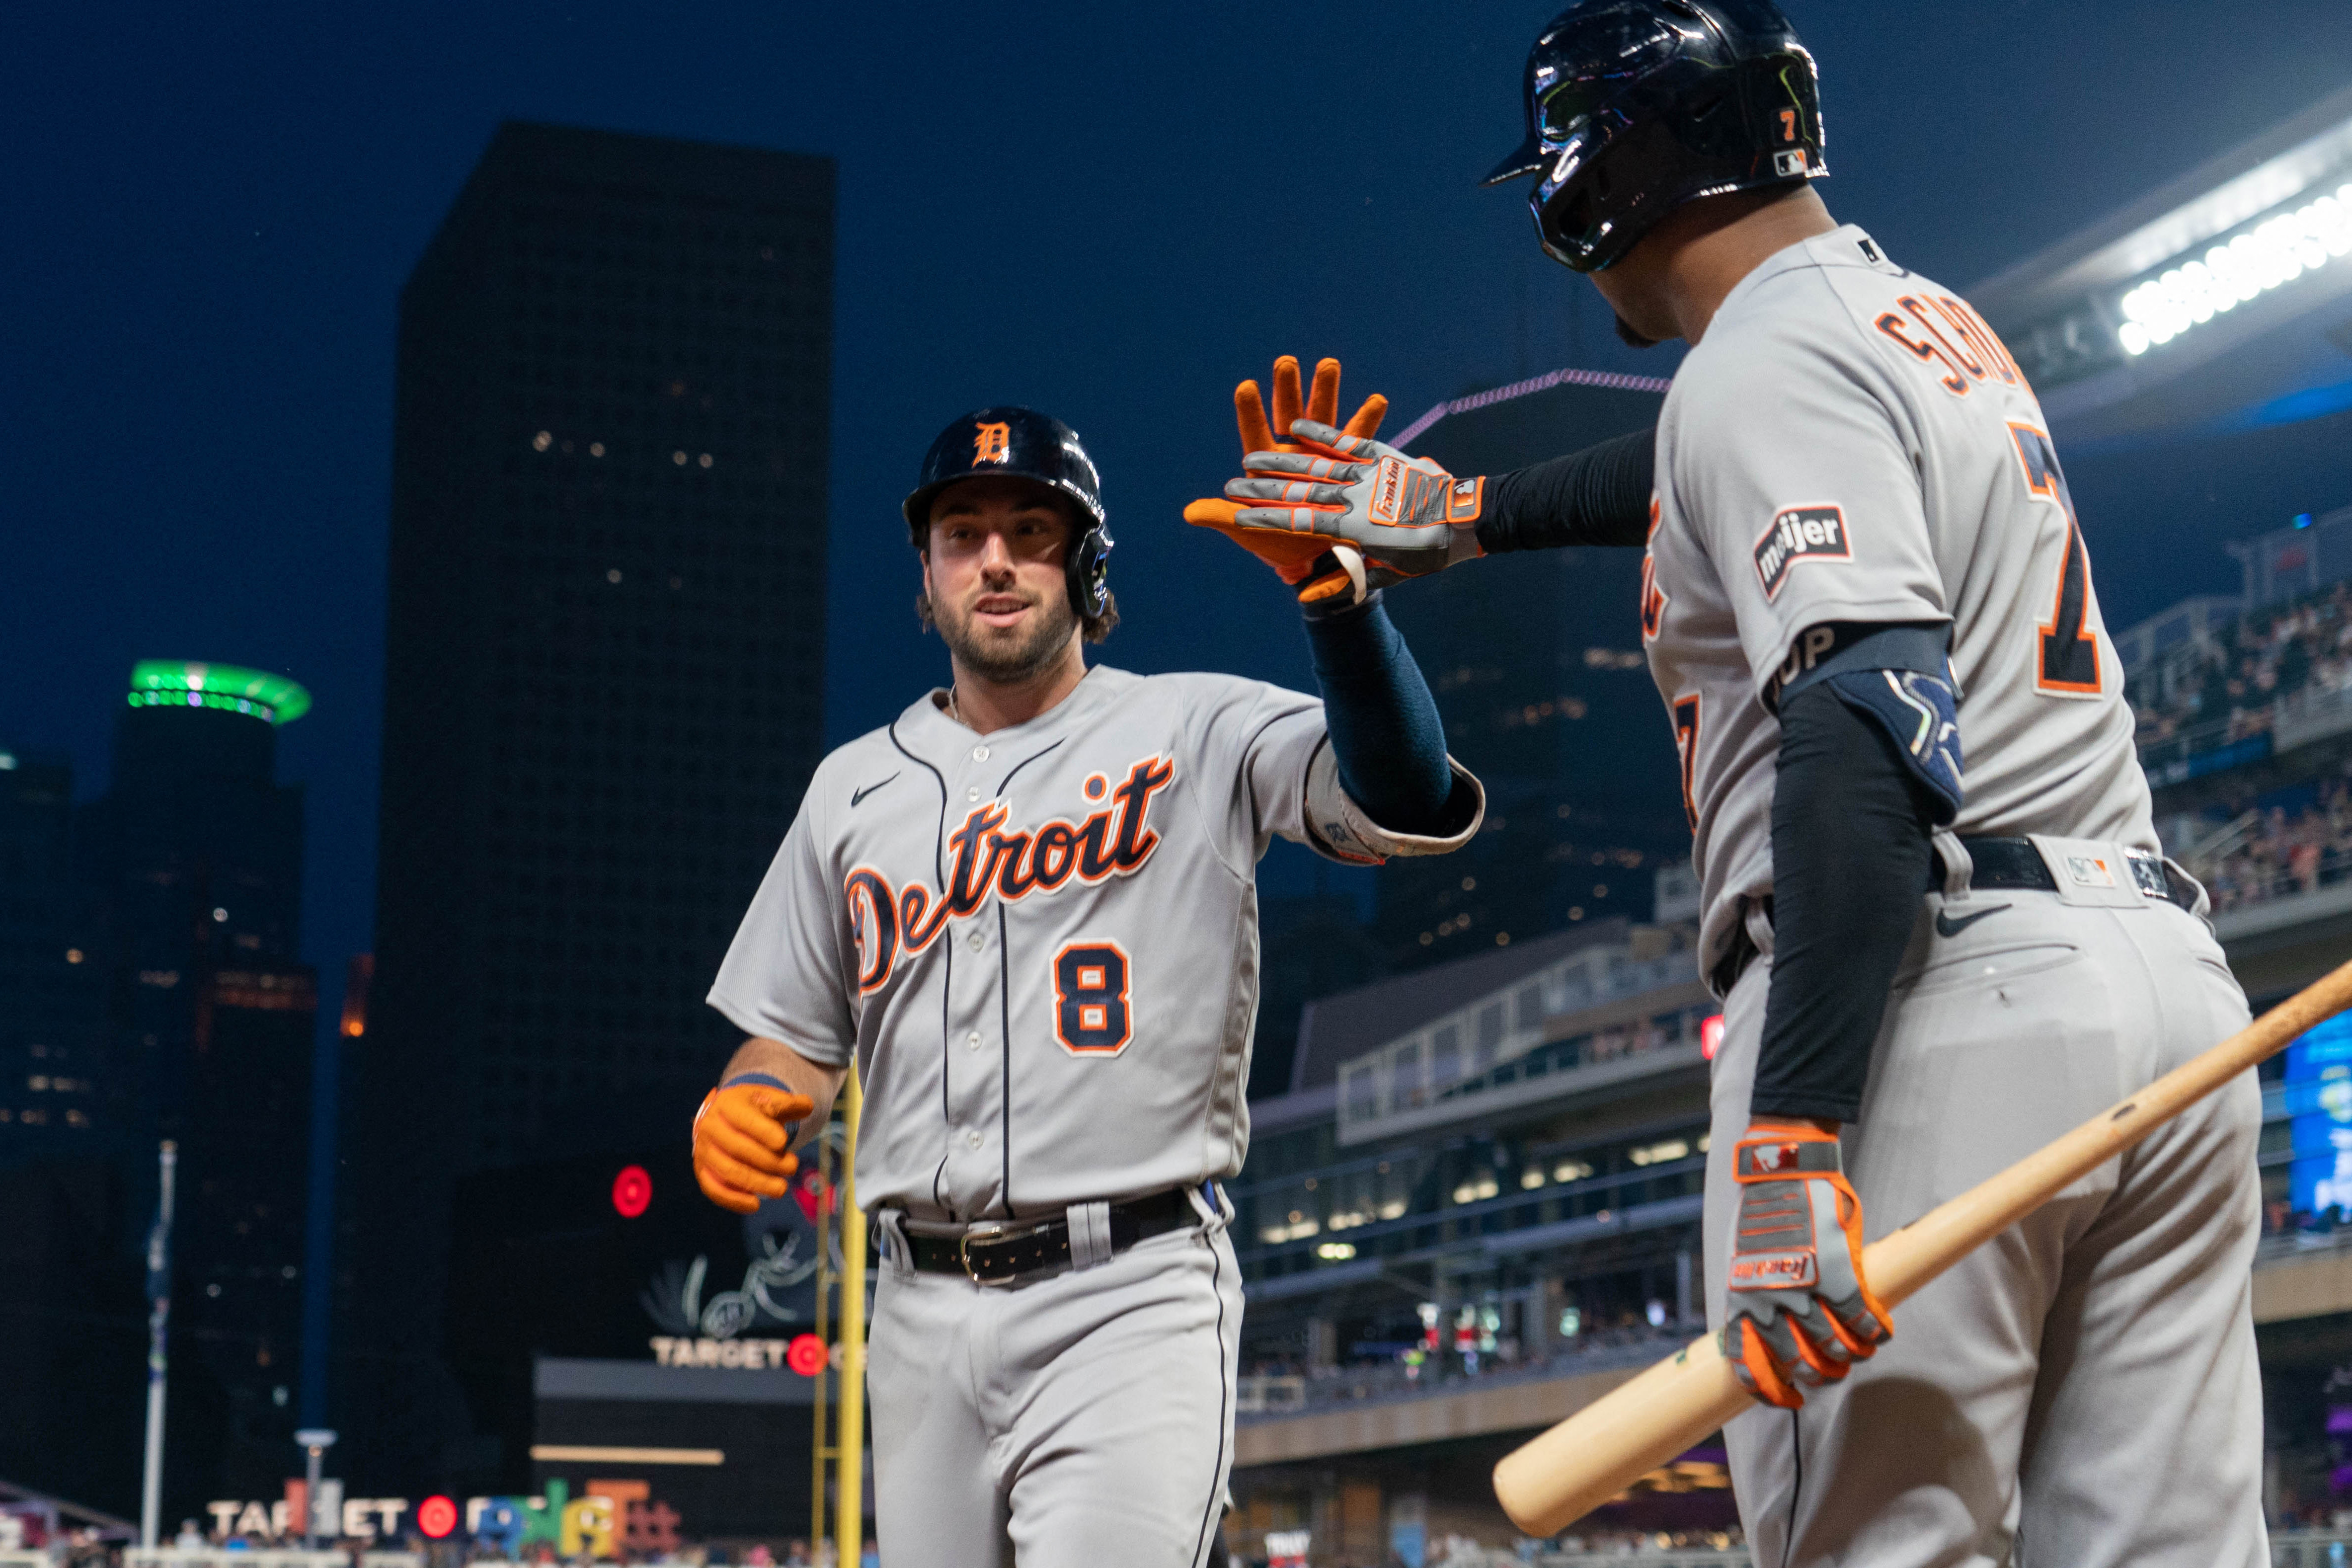 Tigers play the Twins leading series 2-1